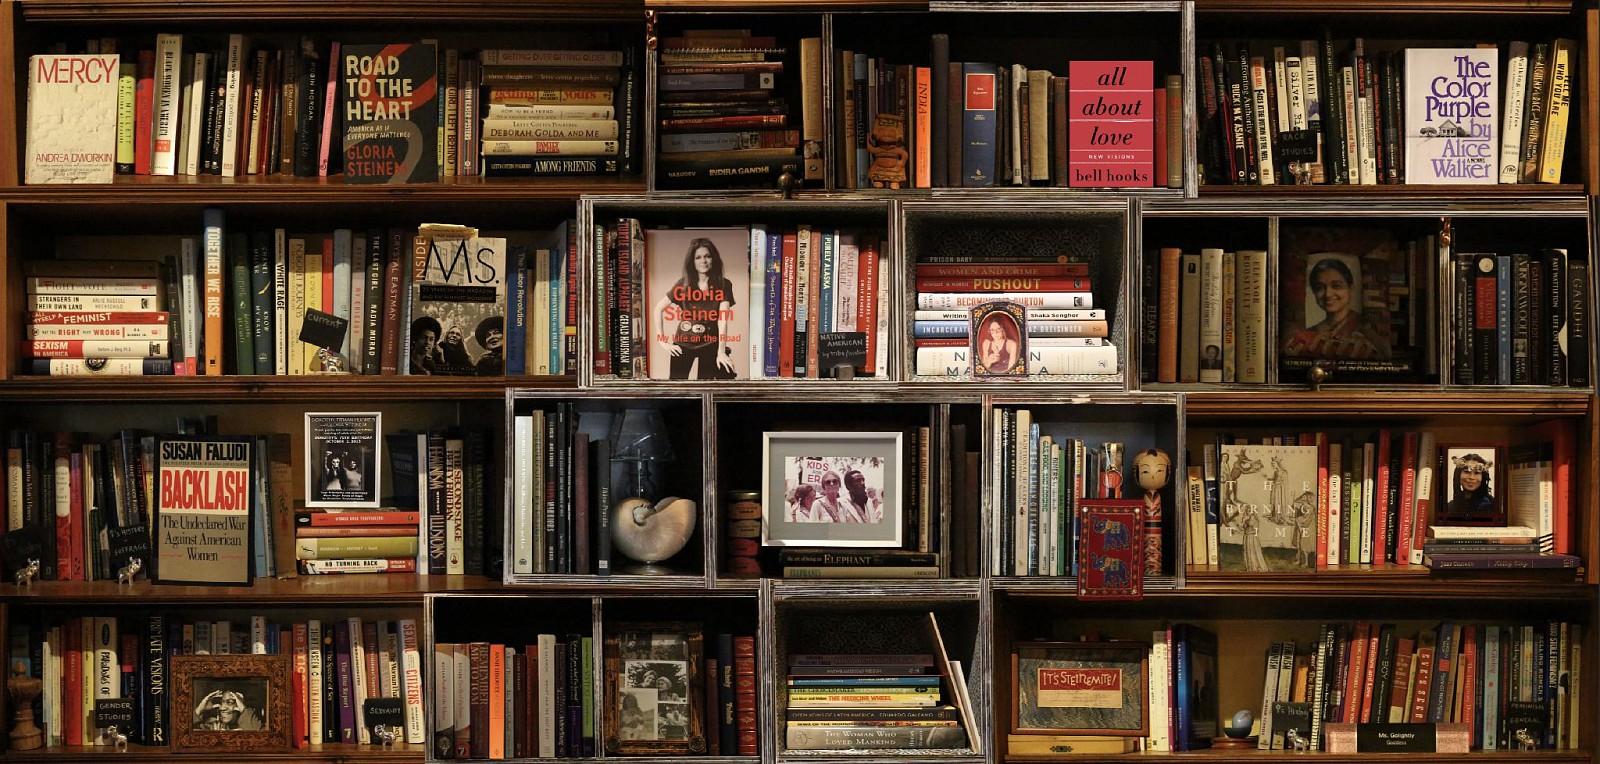 Max-Steven Grossman, Z Gloria Steinem bookscape, 2022
Diasec mounted photograph, 37 x 75 inches and 48 x 100 inches
GROSS00690